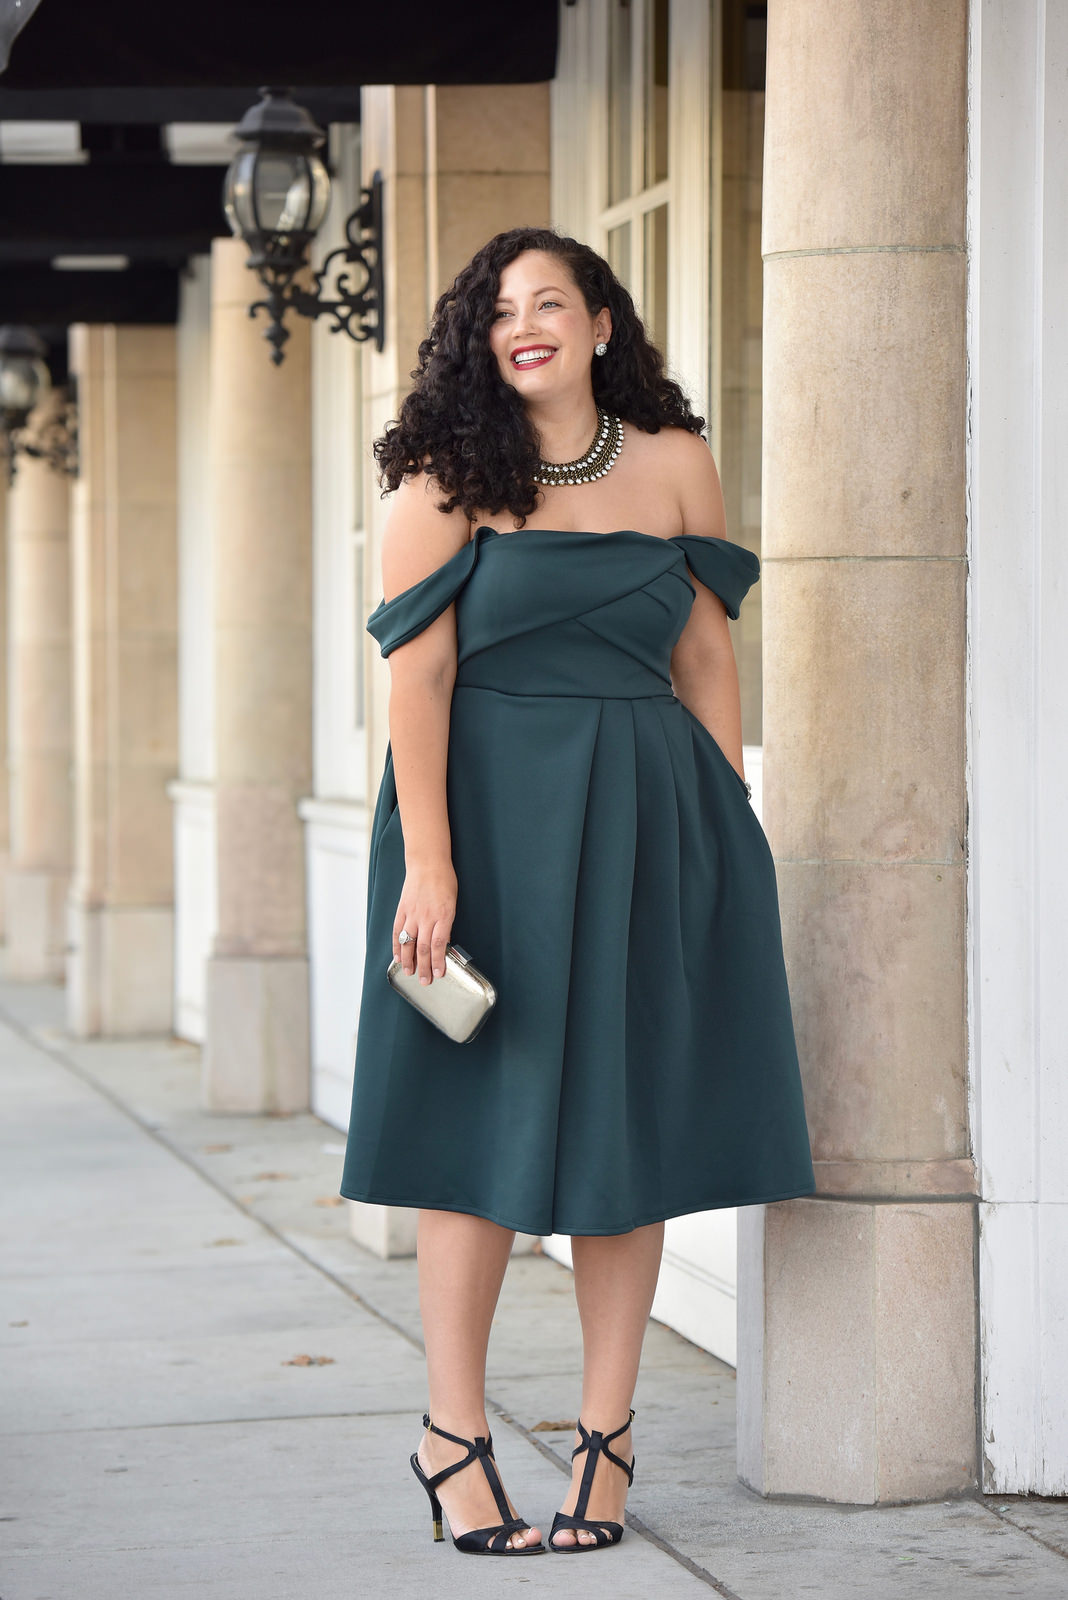 Girl With Curves blogger Tanesha Awasthi wears an emerald off-shoulder dress, silver box clutch and t-strap heels in downtown San Jose, CA.